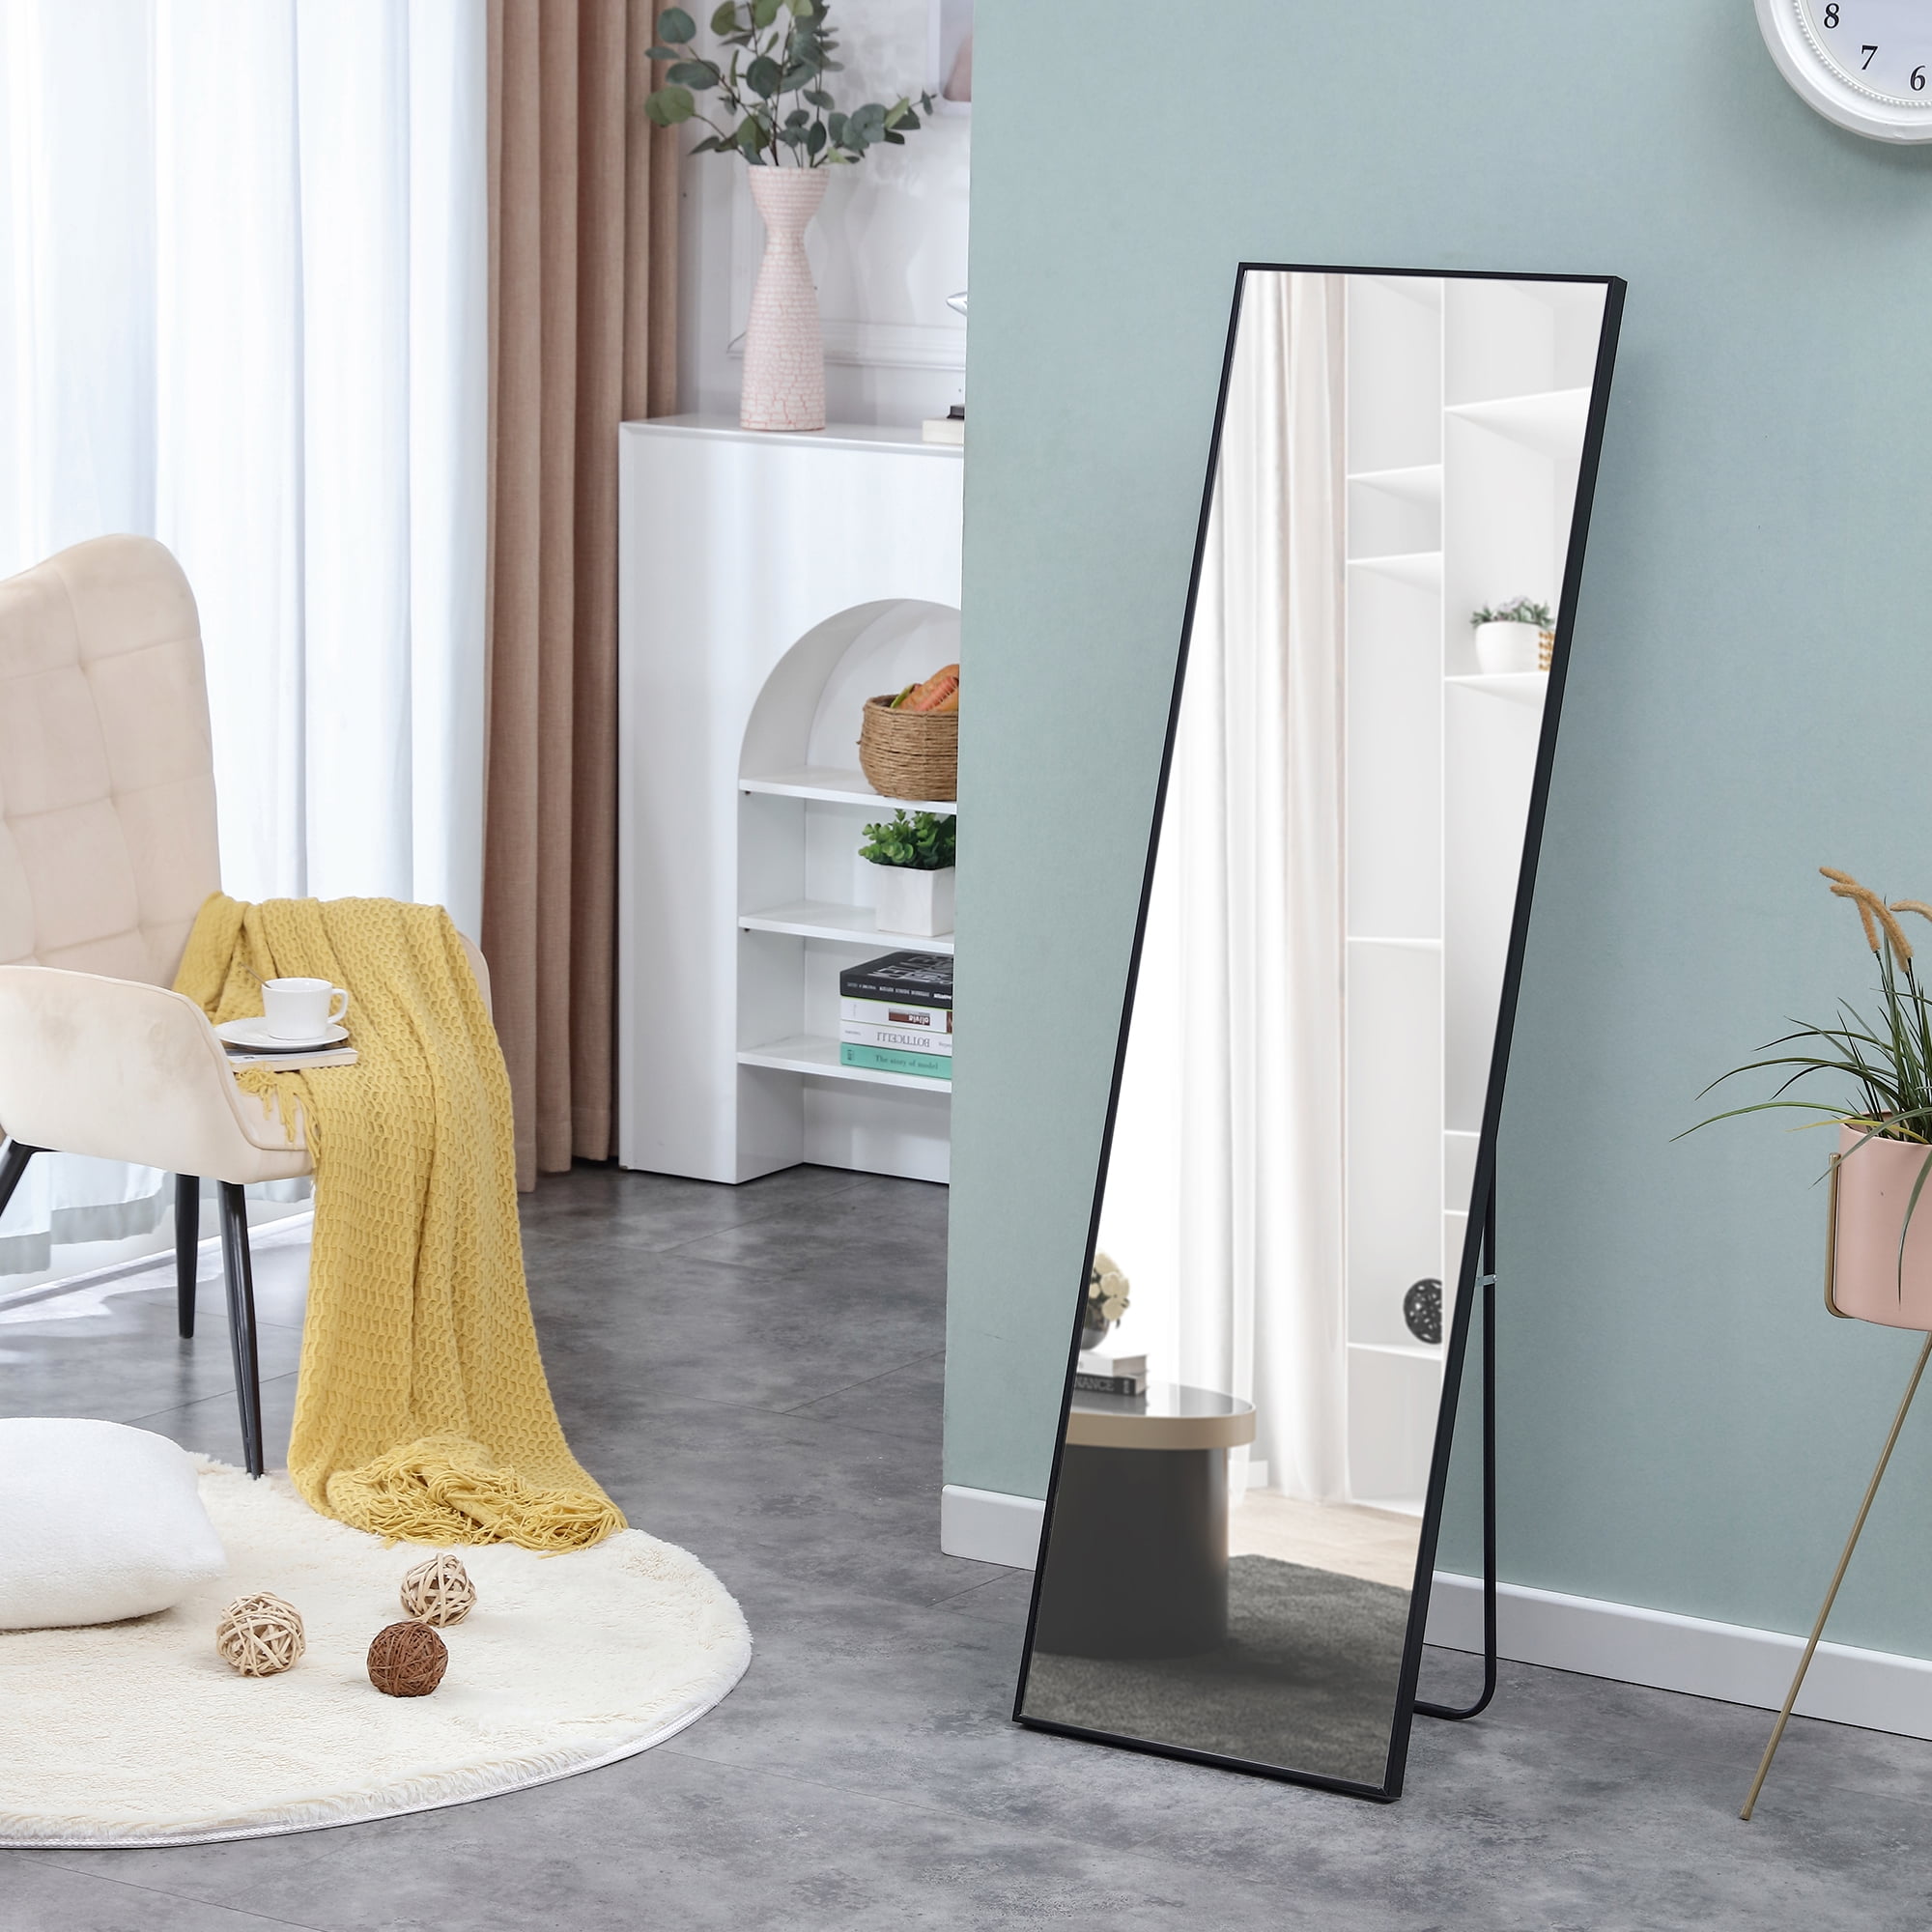 PAPROOS Full Body Mirror with Stand, 59'' x 15.7'' Aluminum Alloy Full  Length Mirror, Wall Mounted Metal Dressing Mirror Bathroom Makeup Mirror,  Large